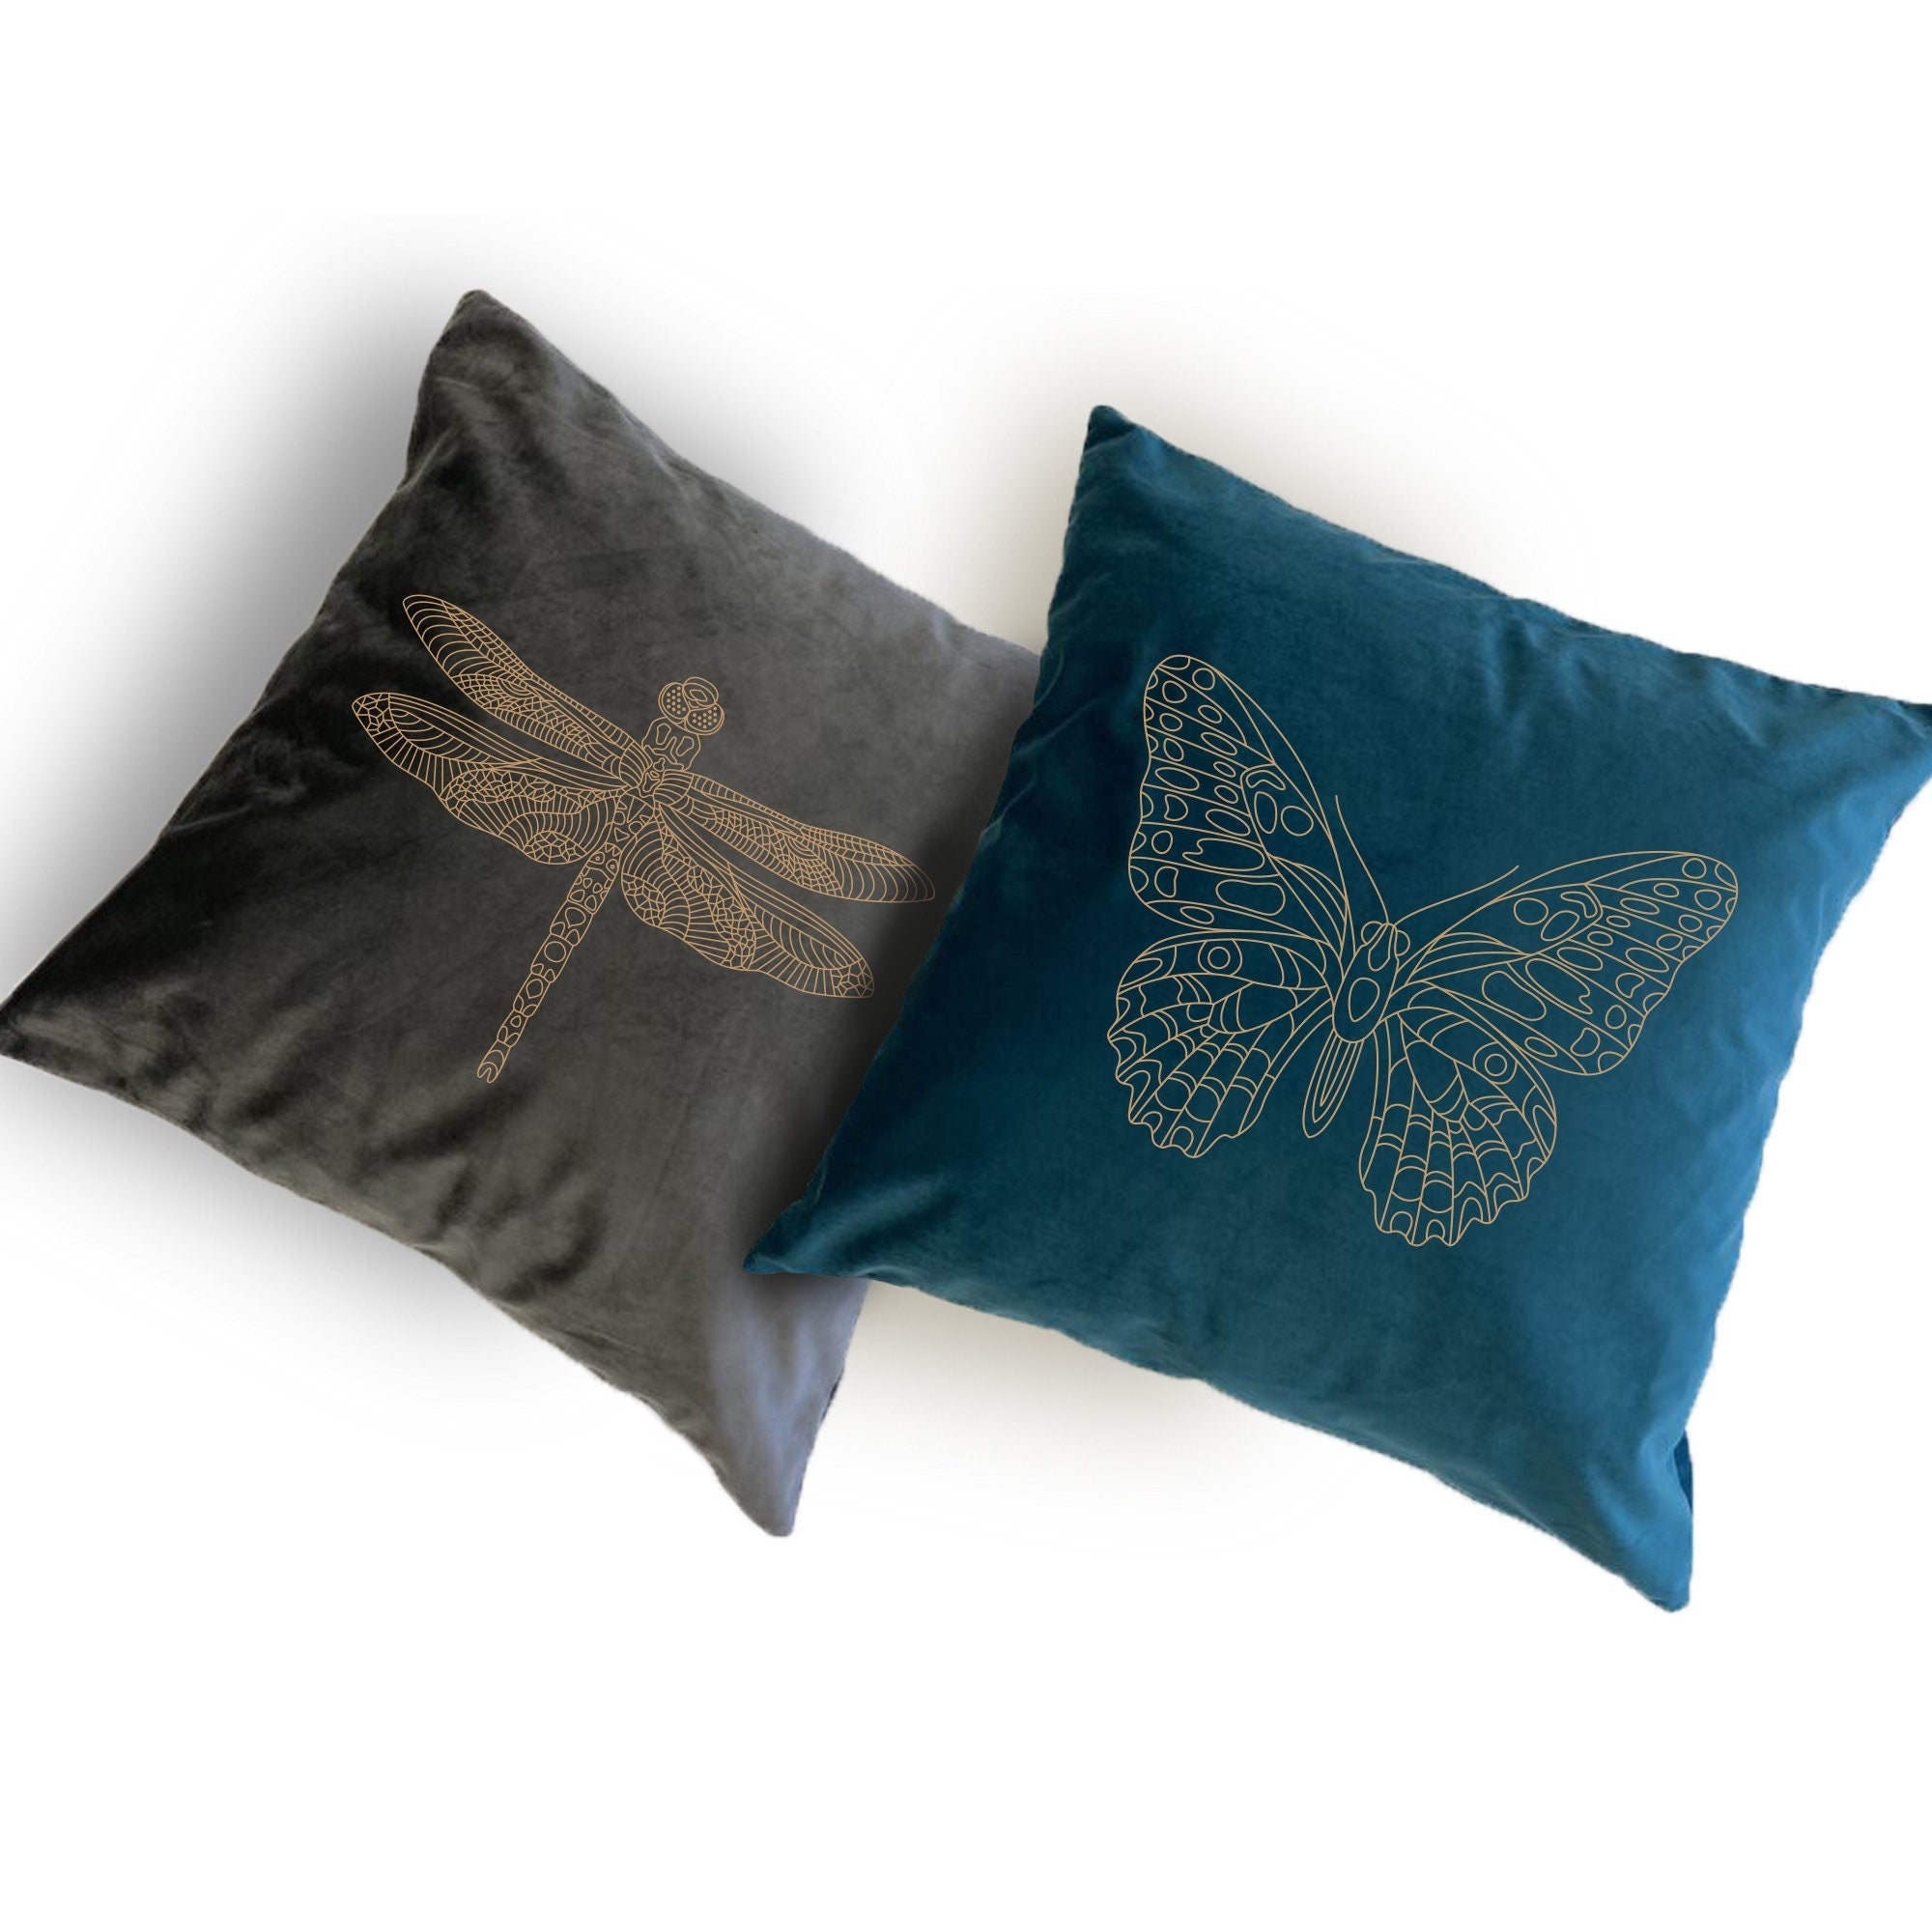 Decorative Velvet Cushion, Butterfly Dragonfly Scorpion Spider Gold foil print, Throw Pillow